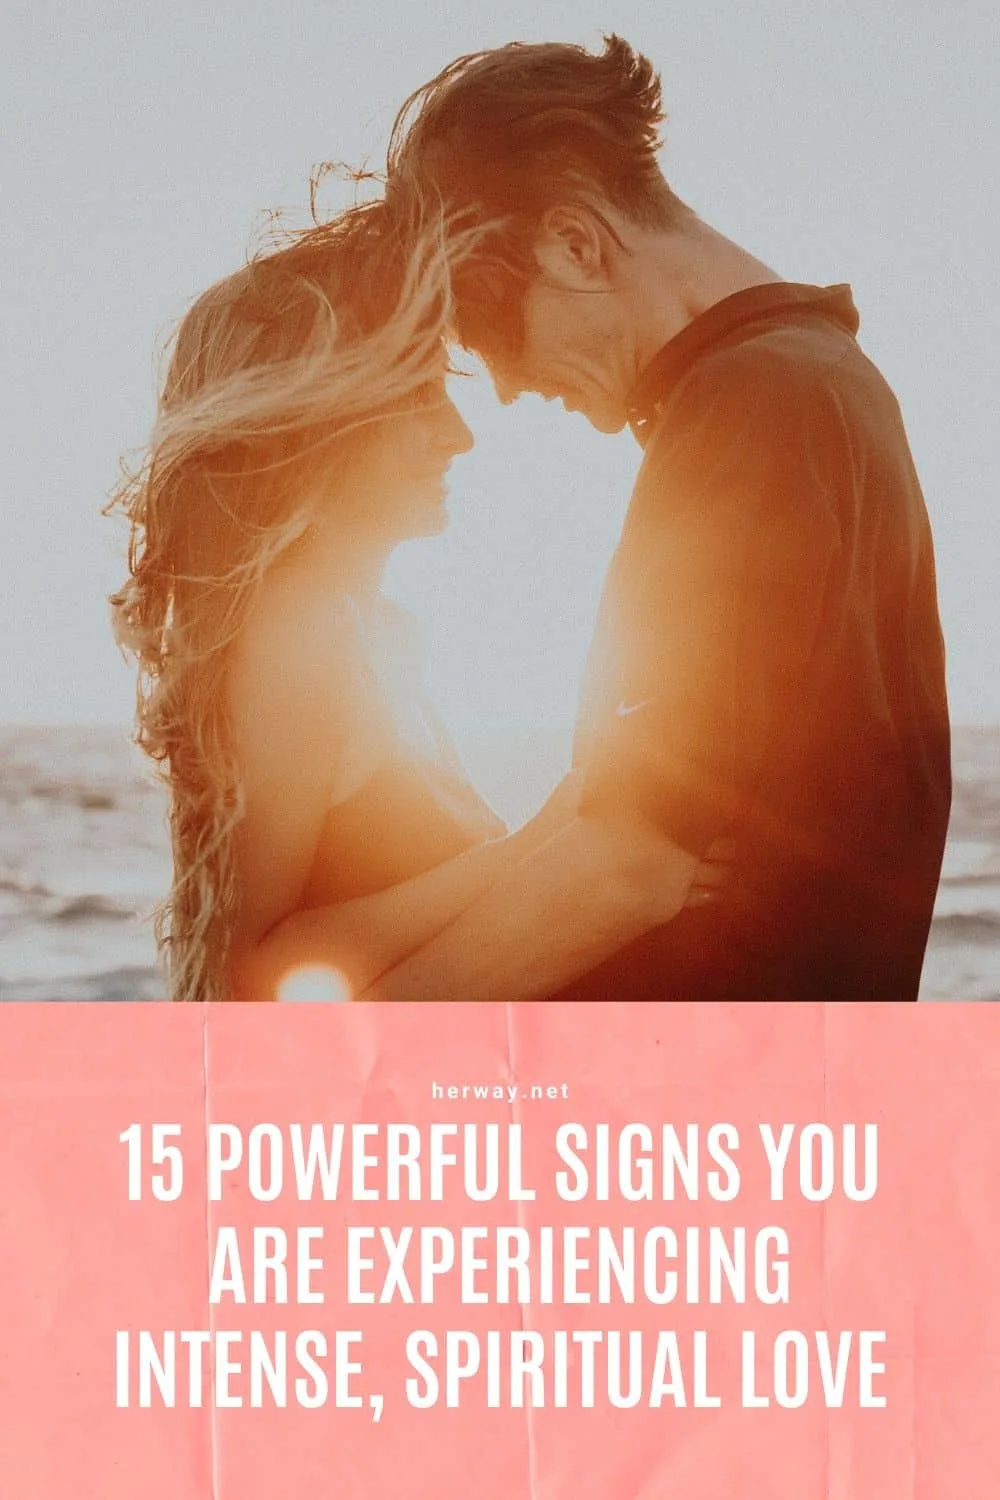 15 Powerful Signs You Are Experiencing Intense, Spiritual Love